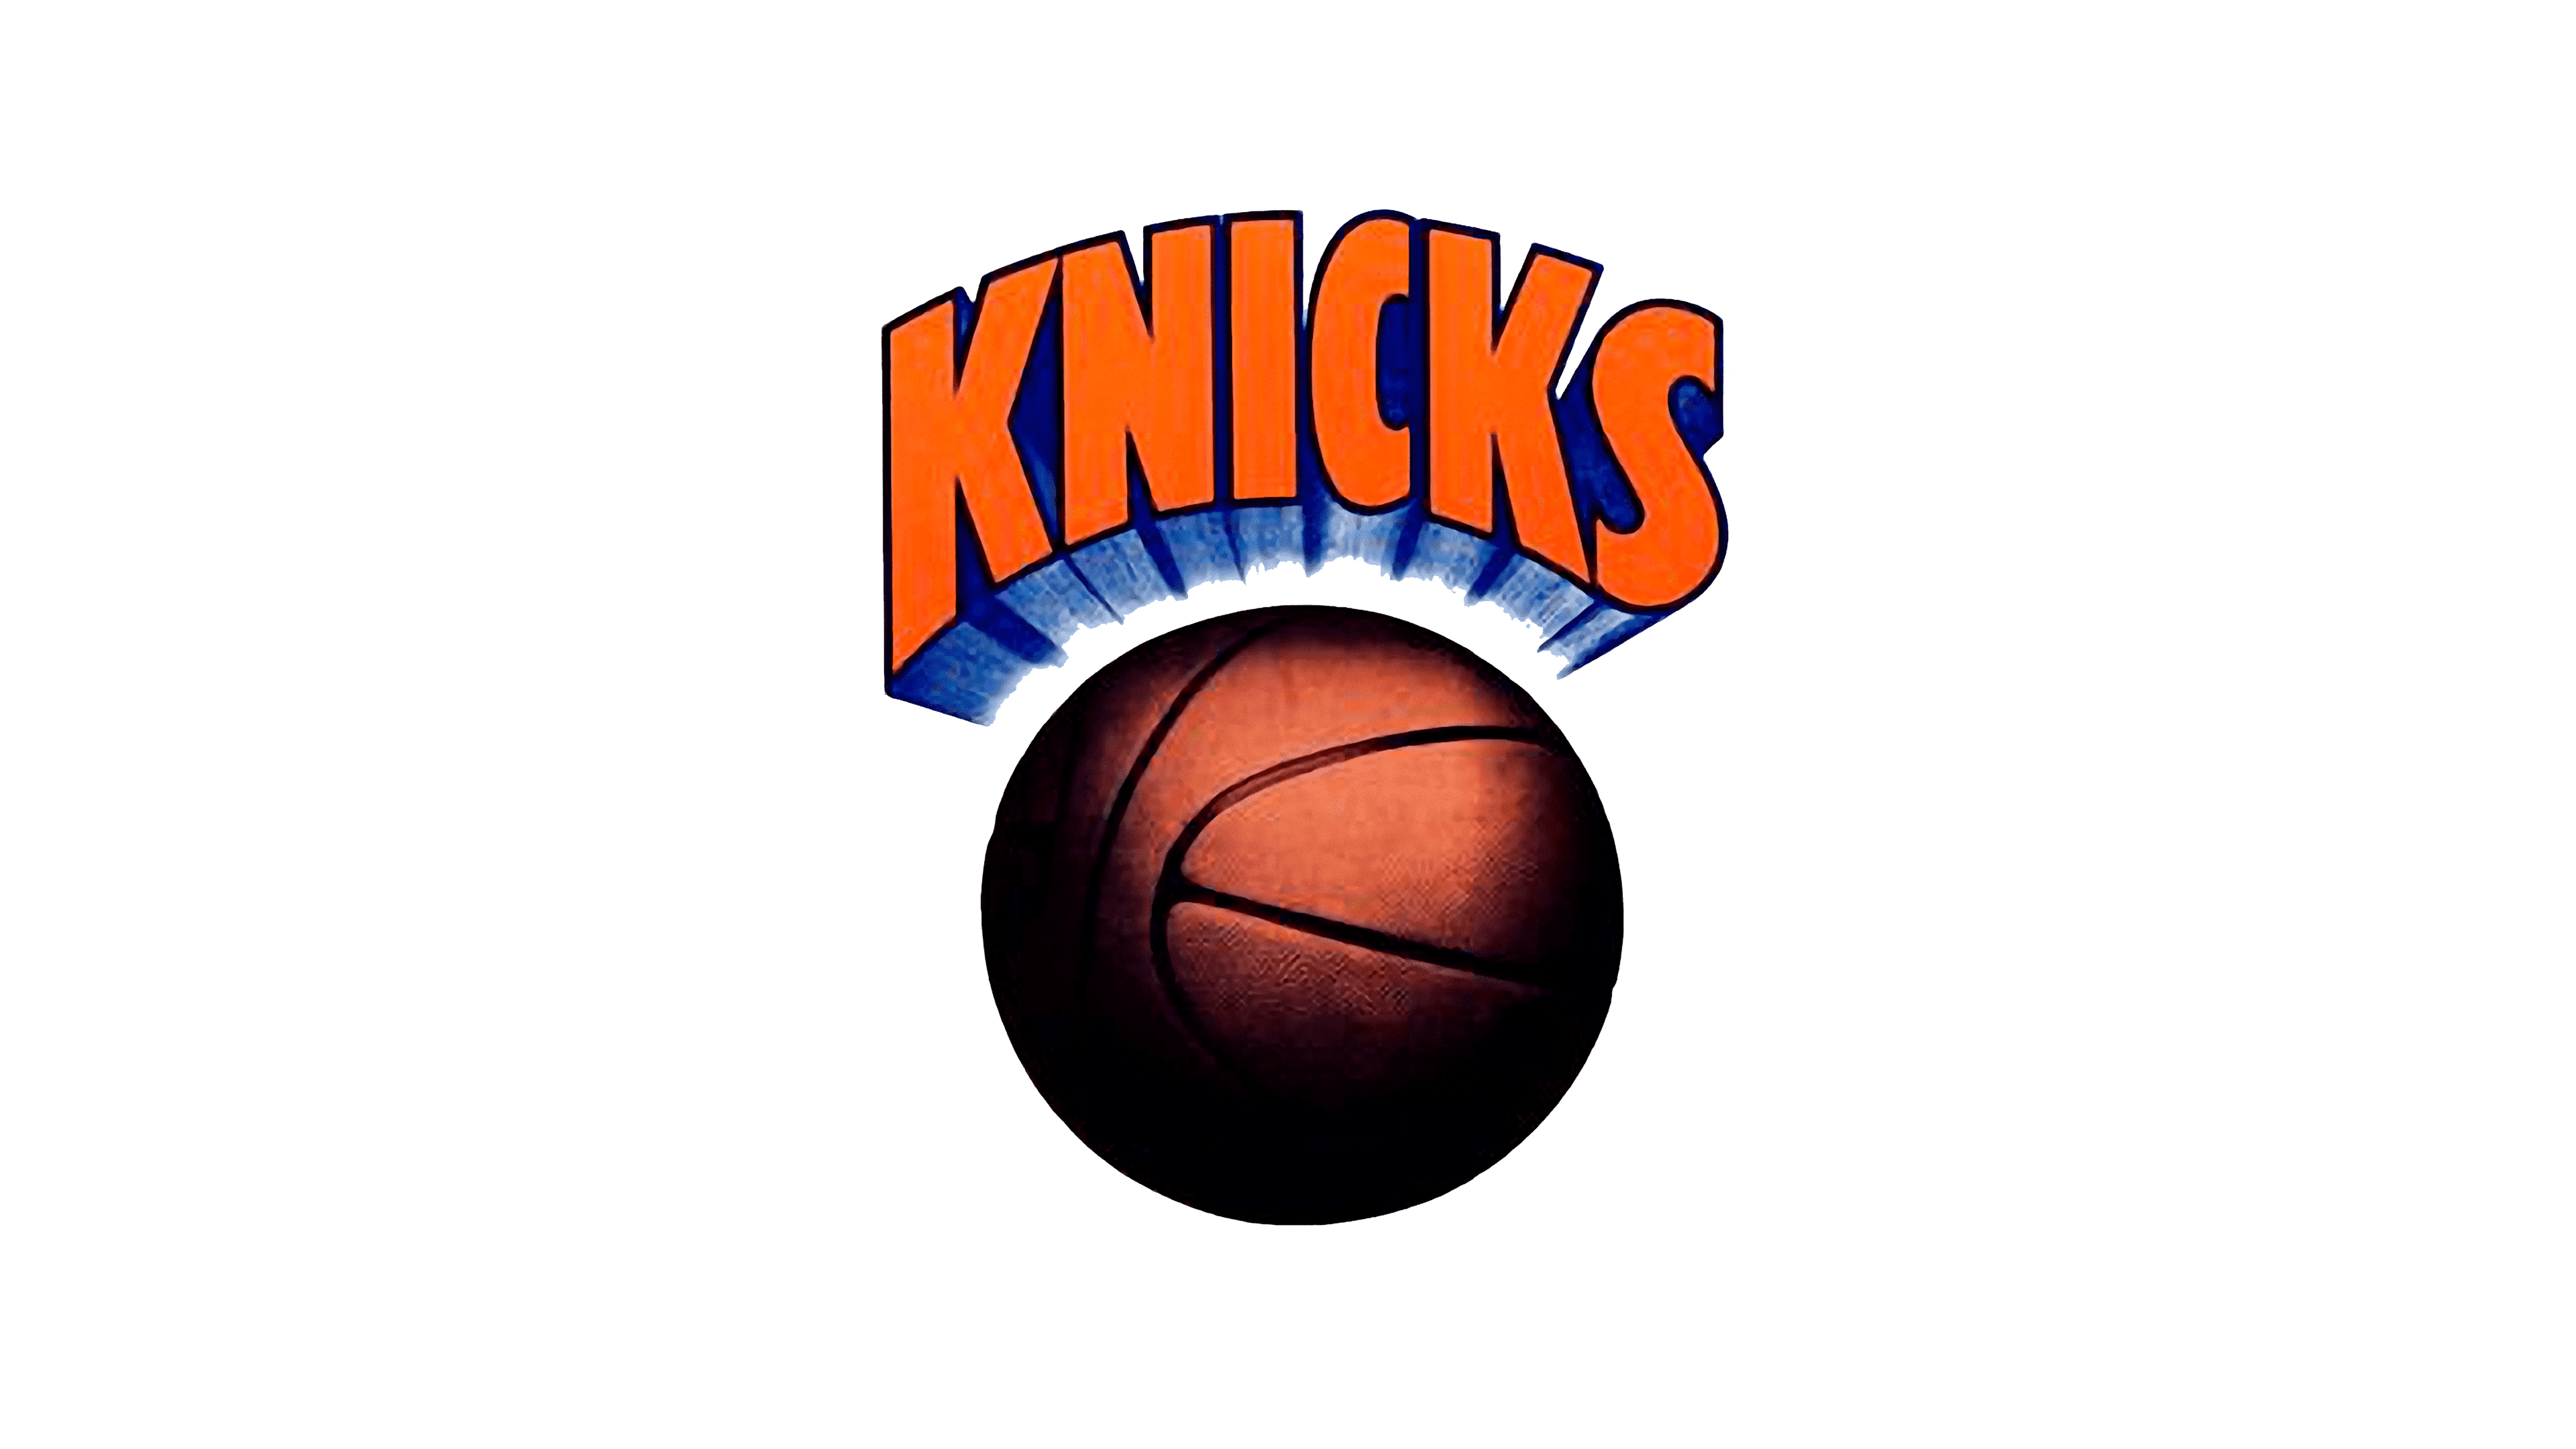 New York Knicks Logo The Most Famous Brands And Company Logos In The World